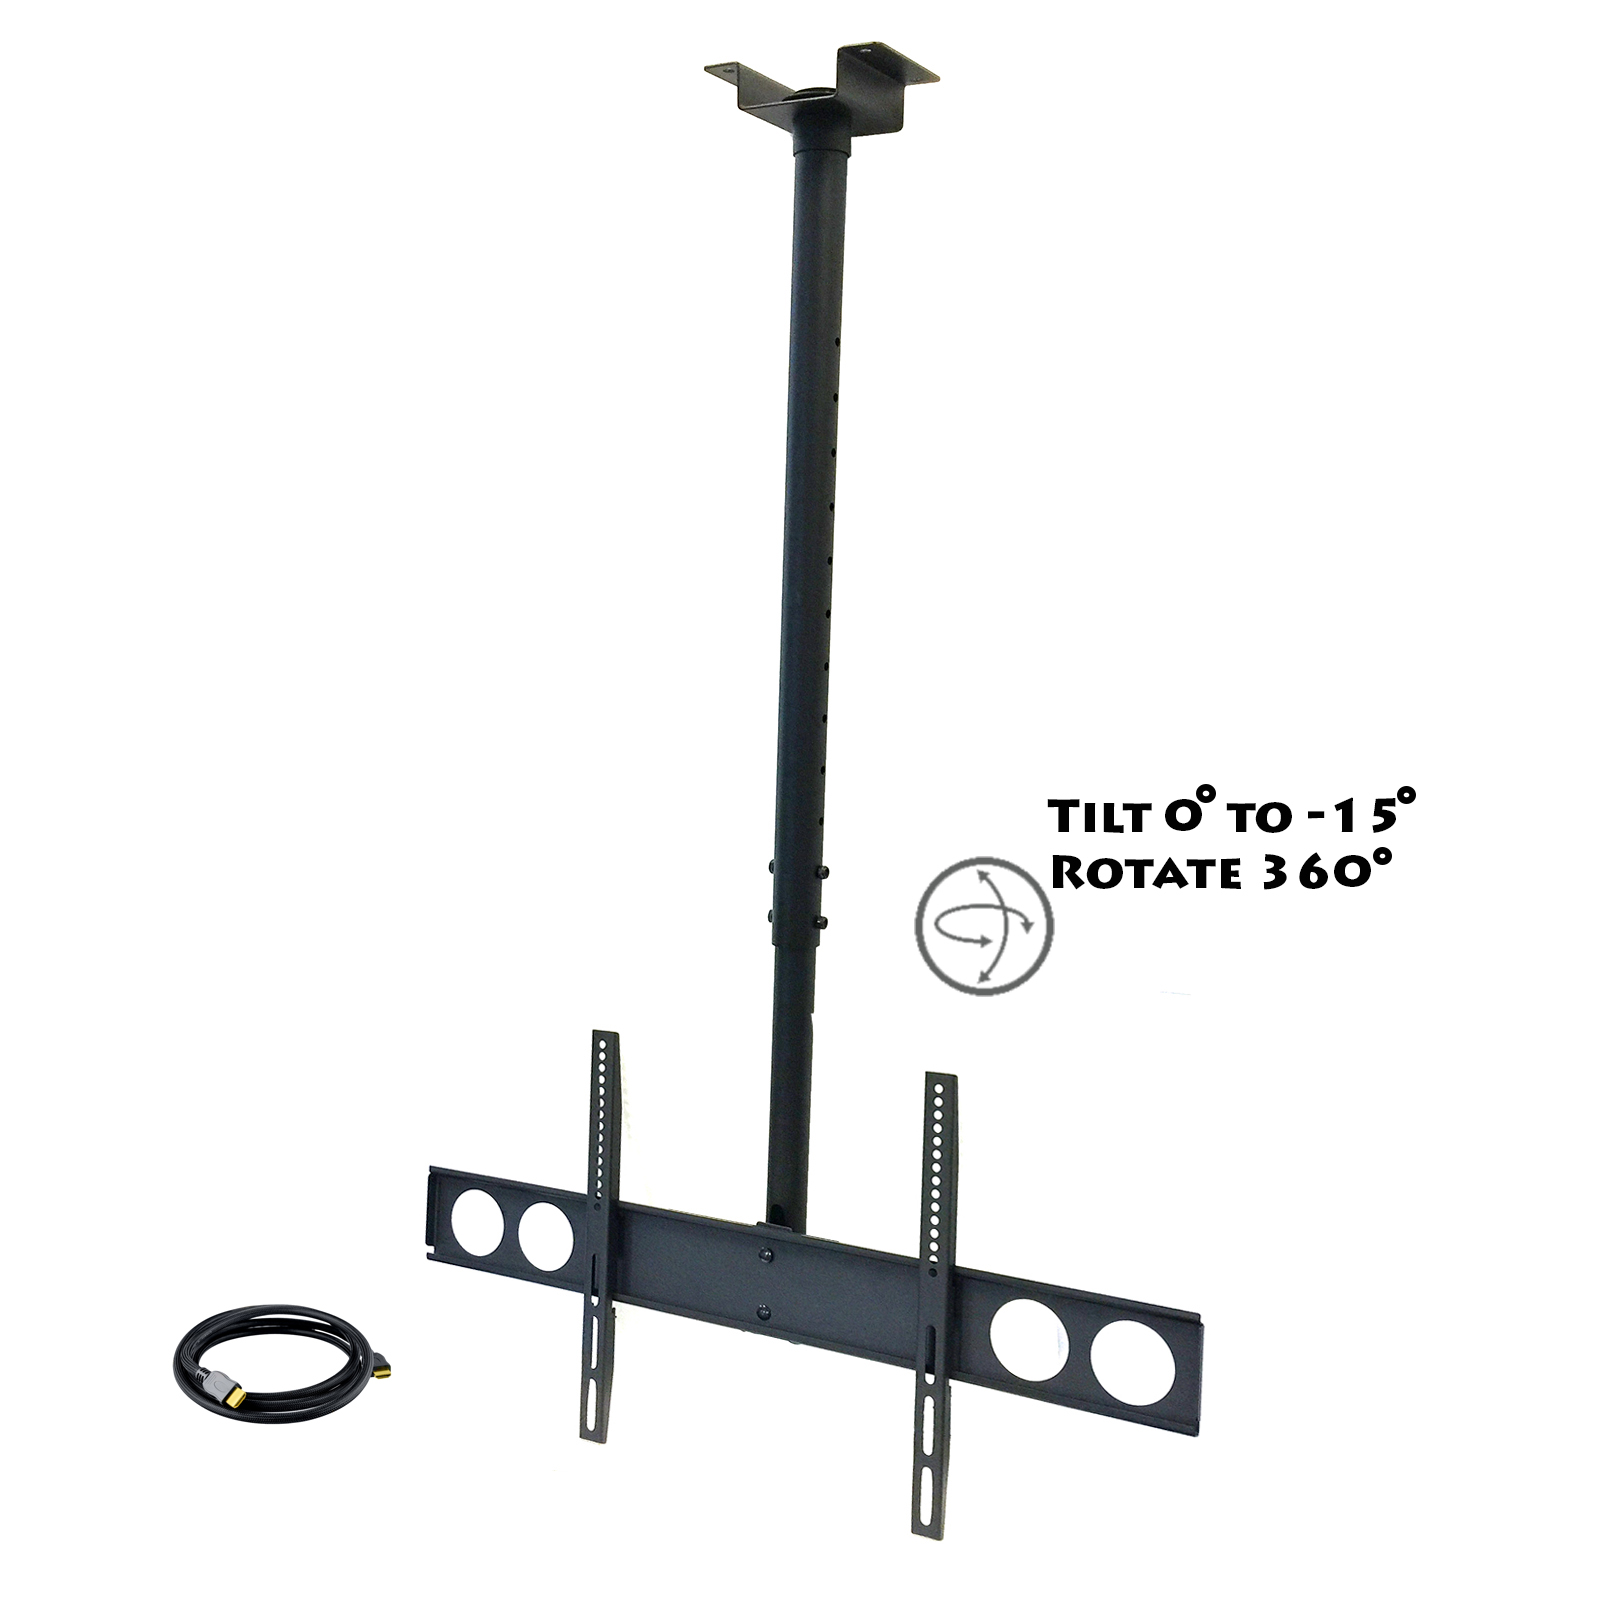 MegaMounts Heavy Duty Tilting Ceiling Television Mount for 37" to 70" LCD, LED and Plasma Televisions with HDMI Cable - image 1 of 2